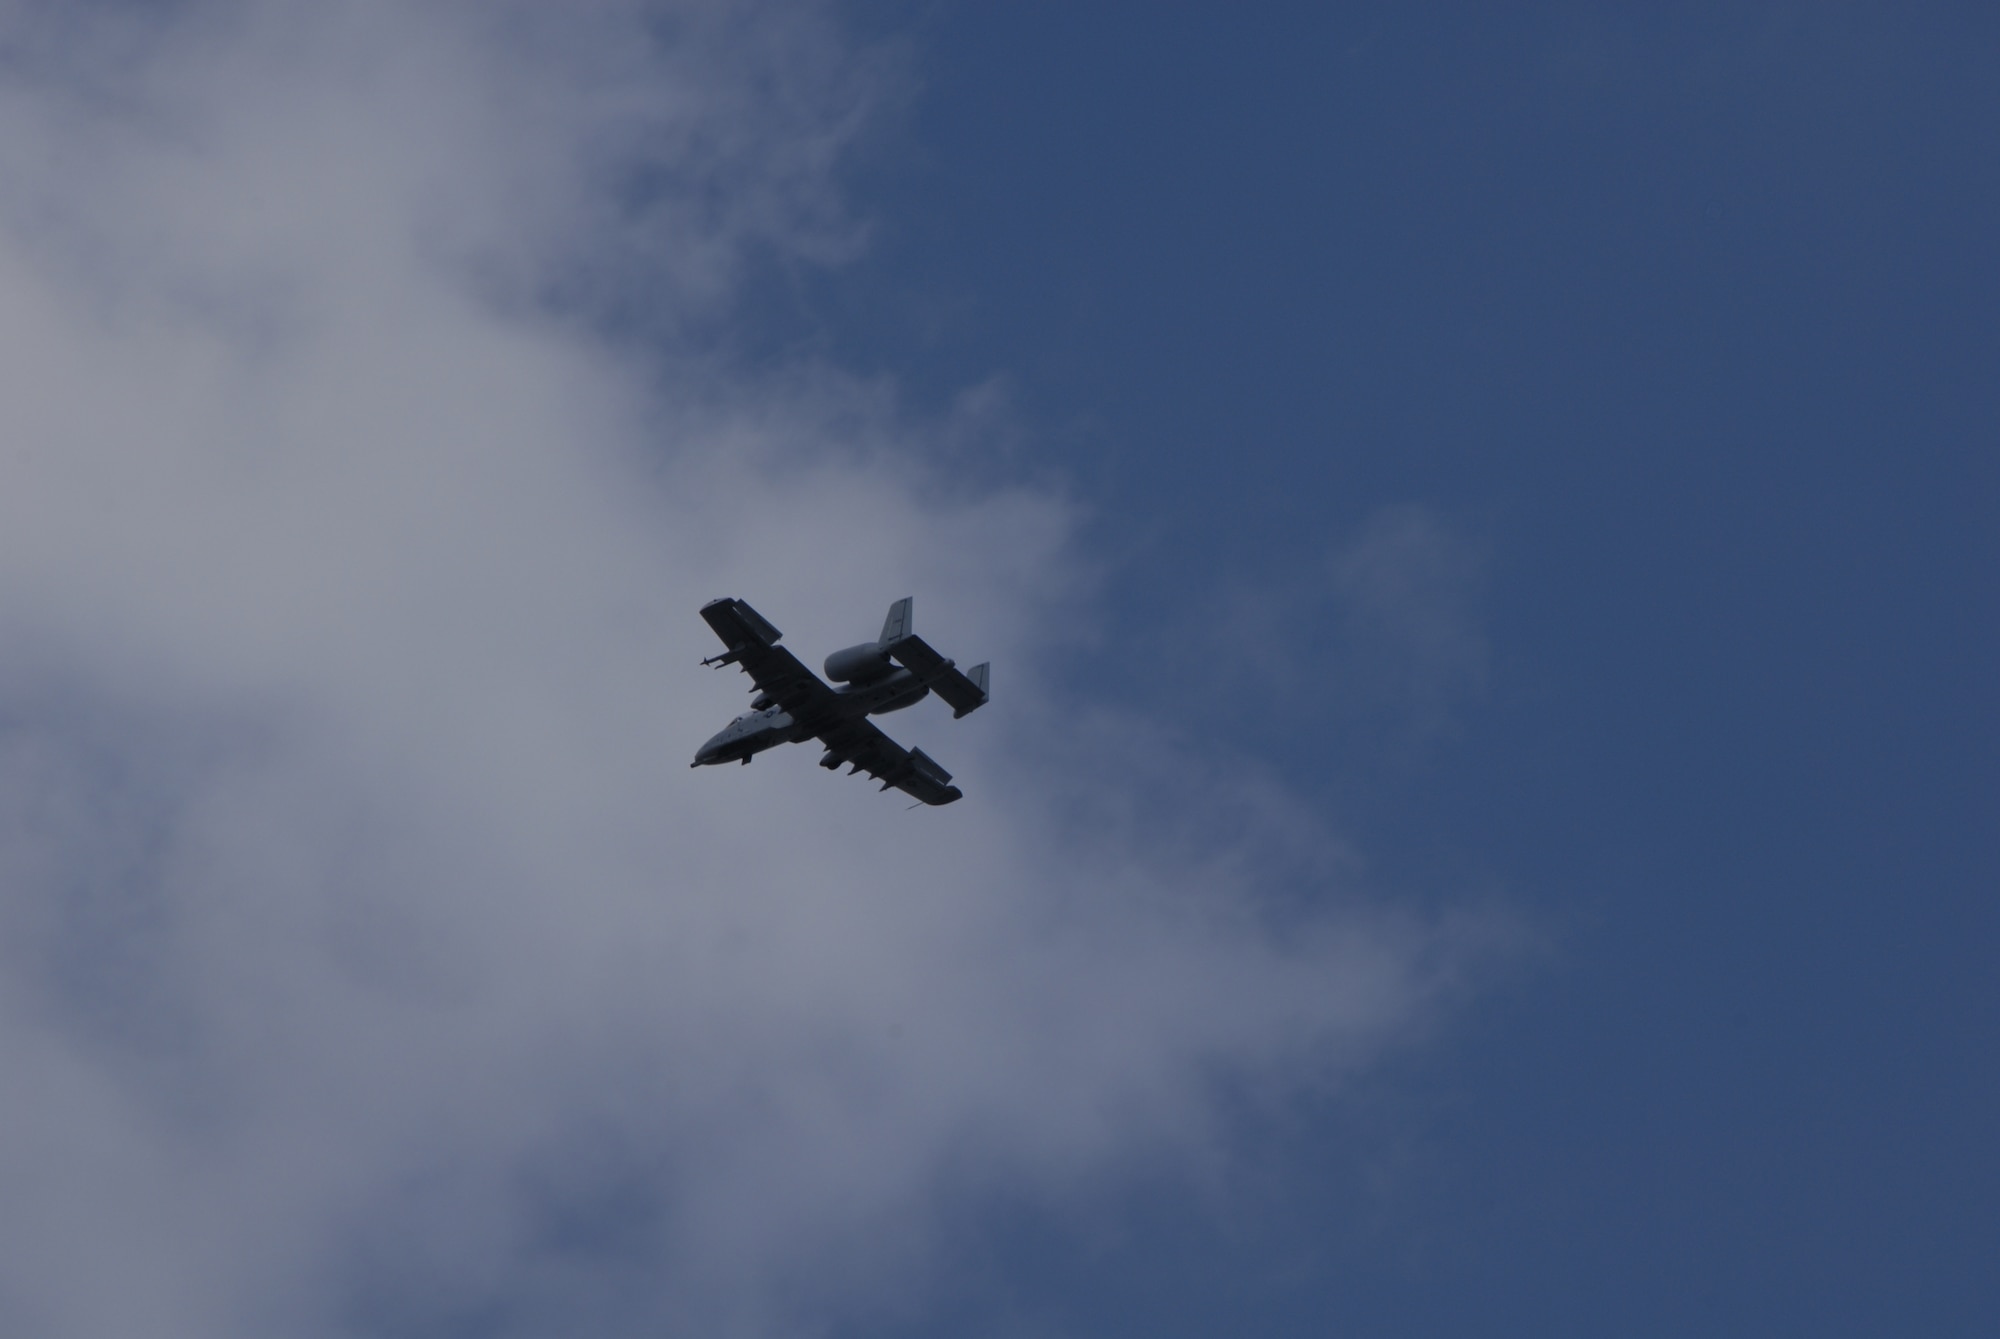 An A-10 Thunderbolt II makes a low-level pass over the airfield at Selfridge Air National Guard Base in Michigan. The 127th Wing, based at Selfridge, recently began flying the aircraft, also known as the Warthog, after completing a transition from flying F-16s. The A-10s are scheduled to be on display and part of the flying demonstration during the 2009 Selfridge Air Show, Aug. 22 and 23. (U.S. Air Force photo by Technical Sgt. David Kujawa) 